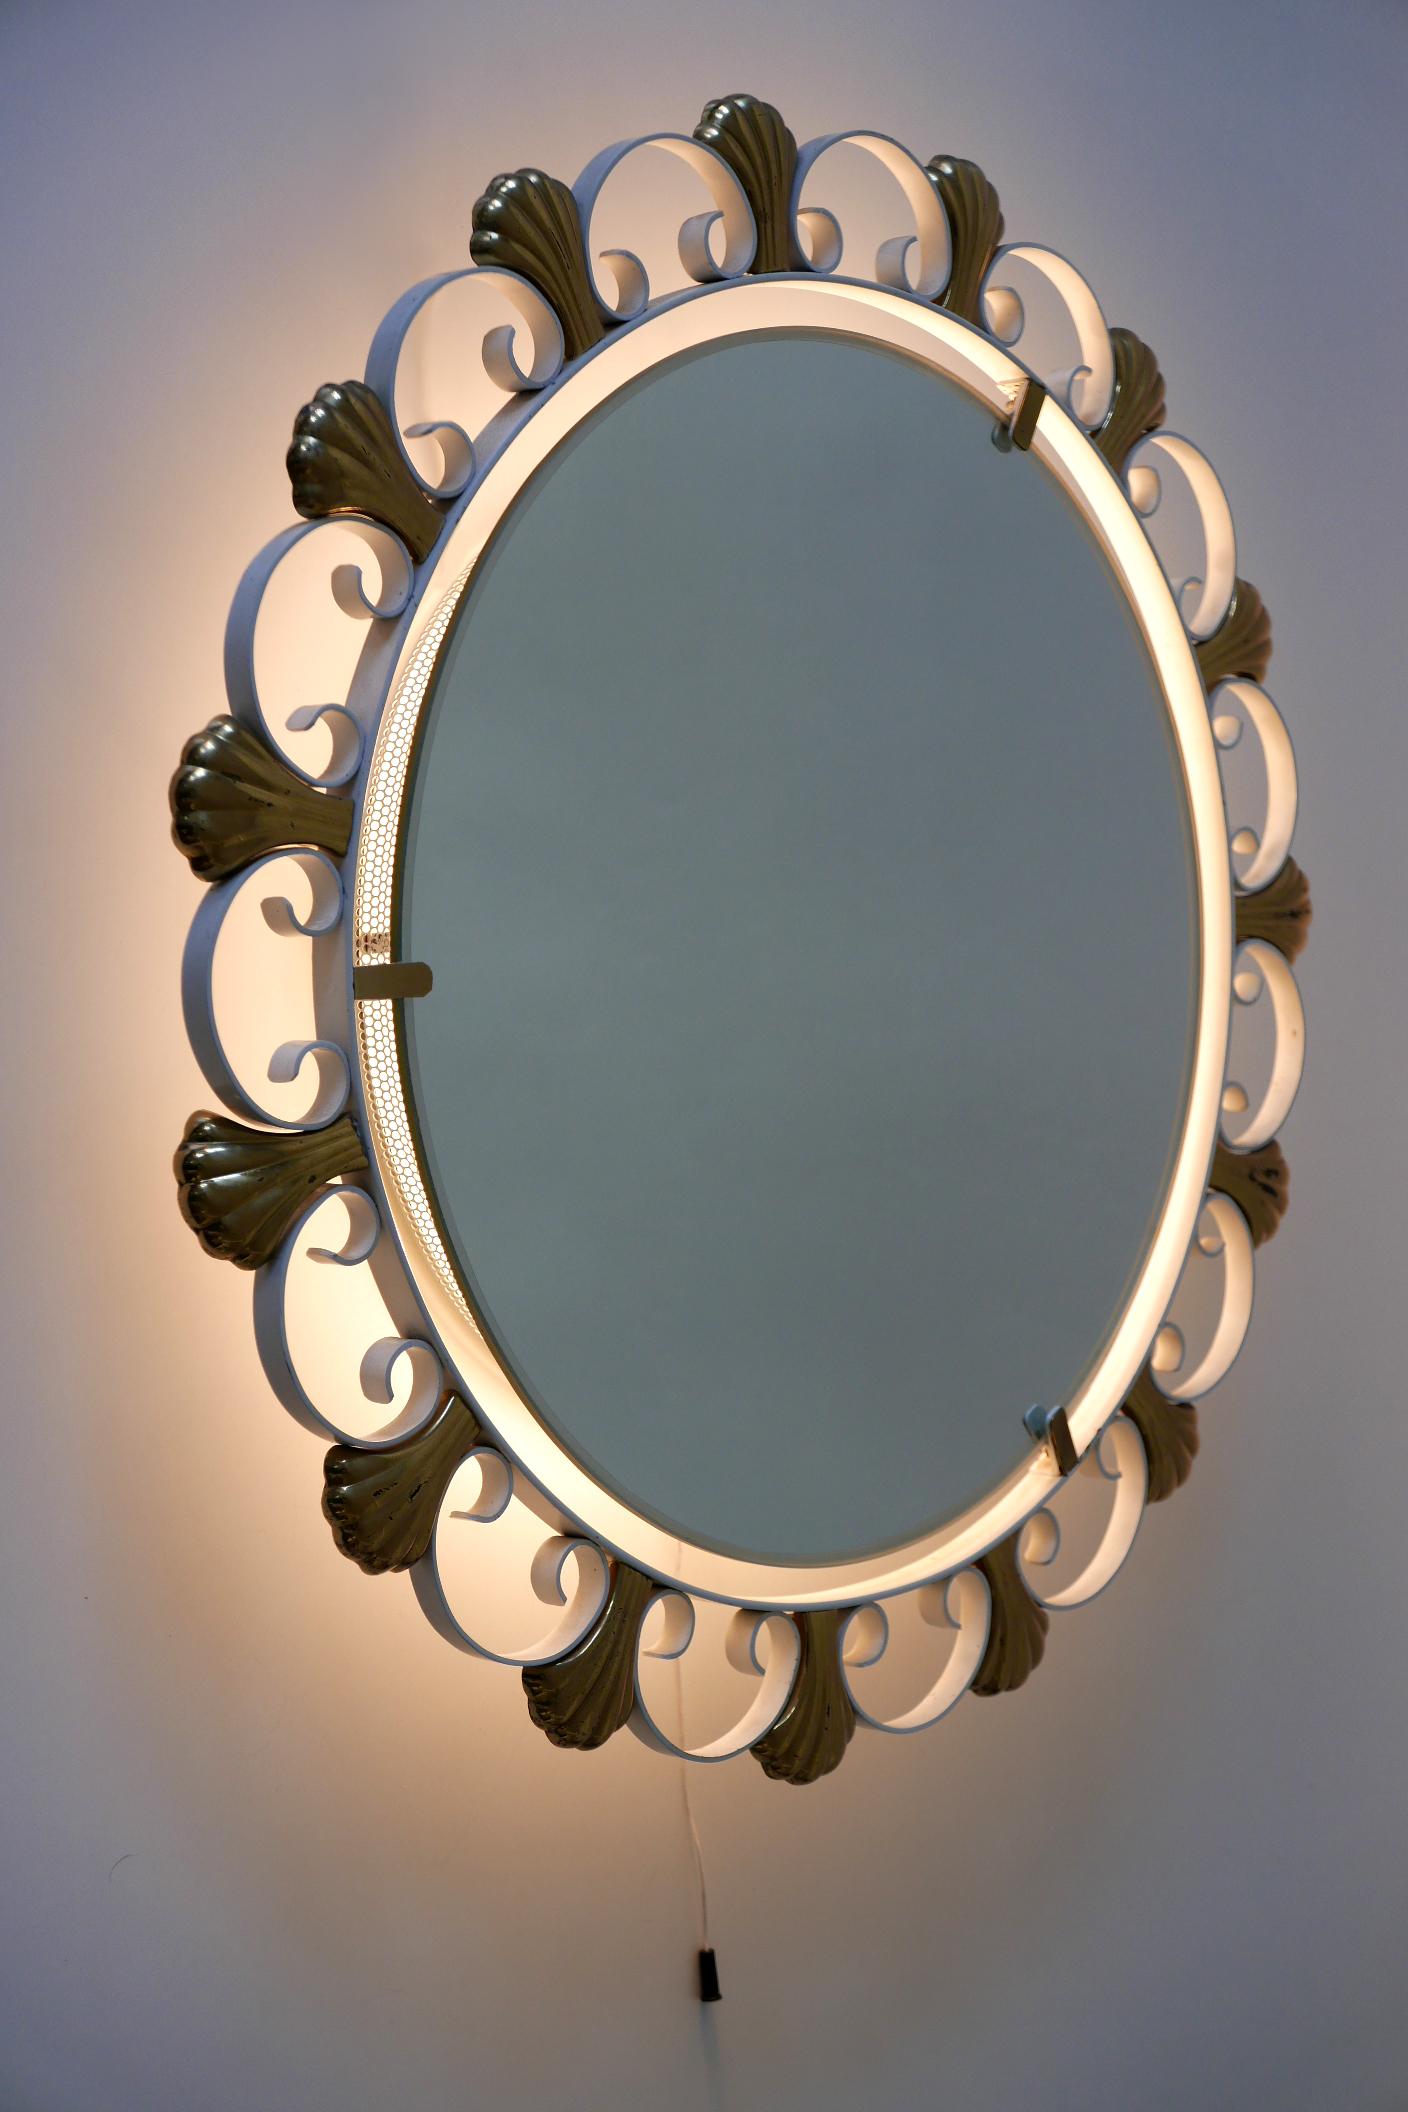 Elegant Mid-Century Modern Backlit Wall Mirror by Hillebrand, 1960s, Germany For Sale 4